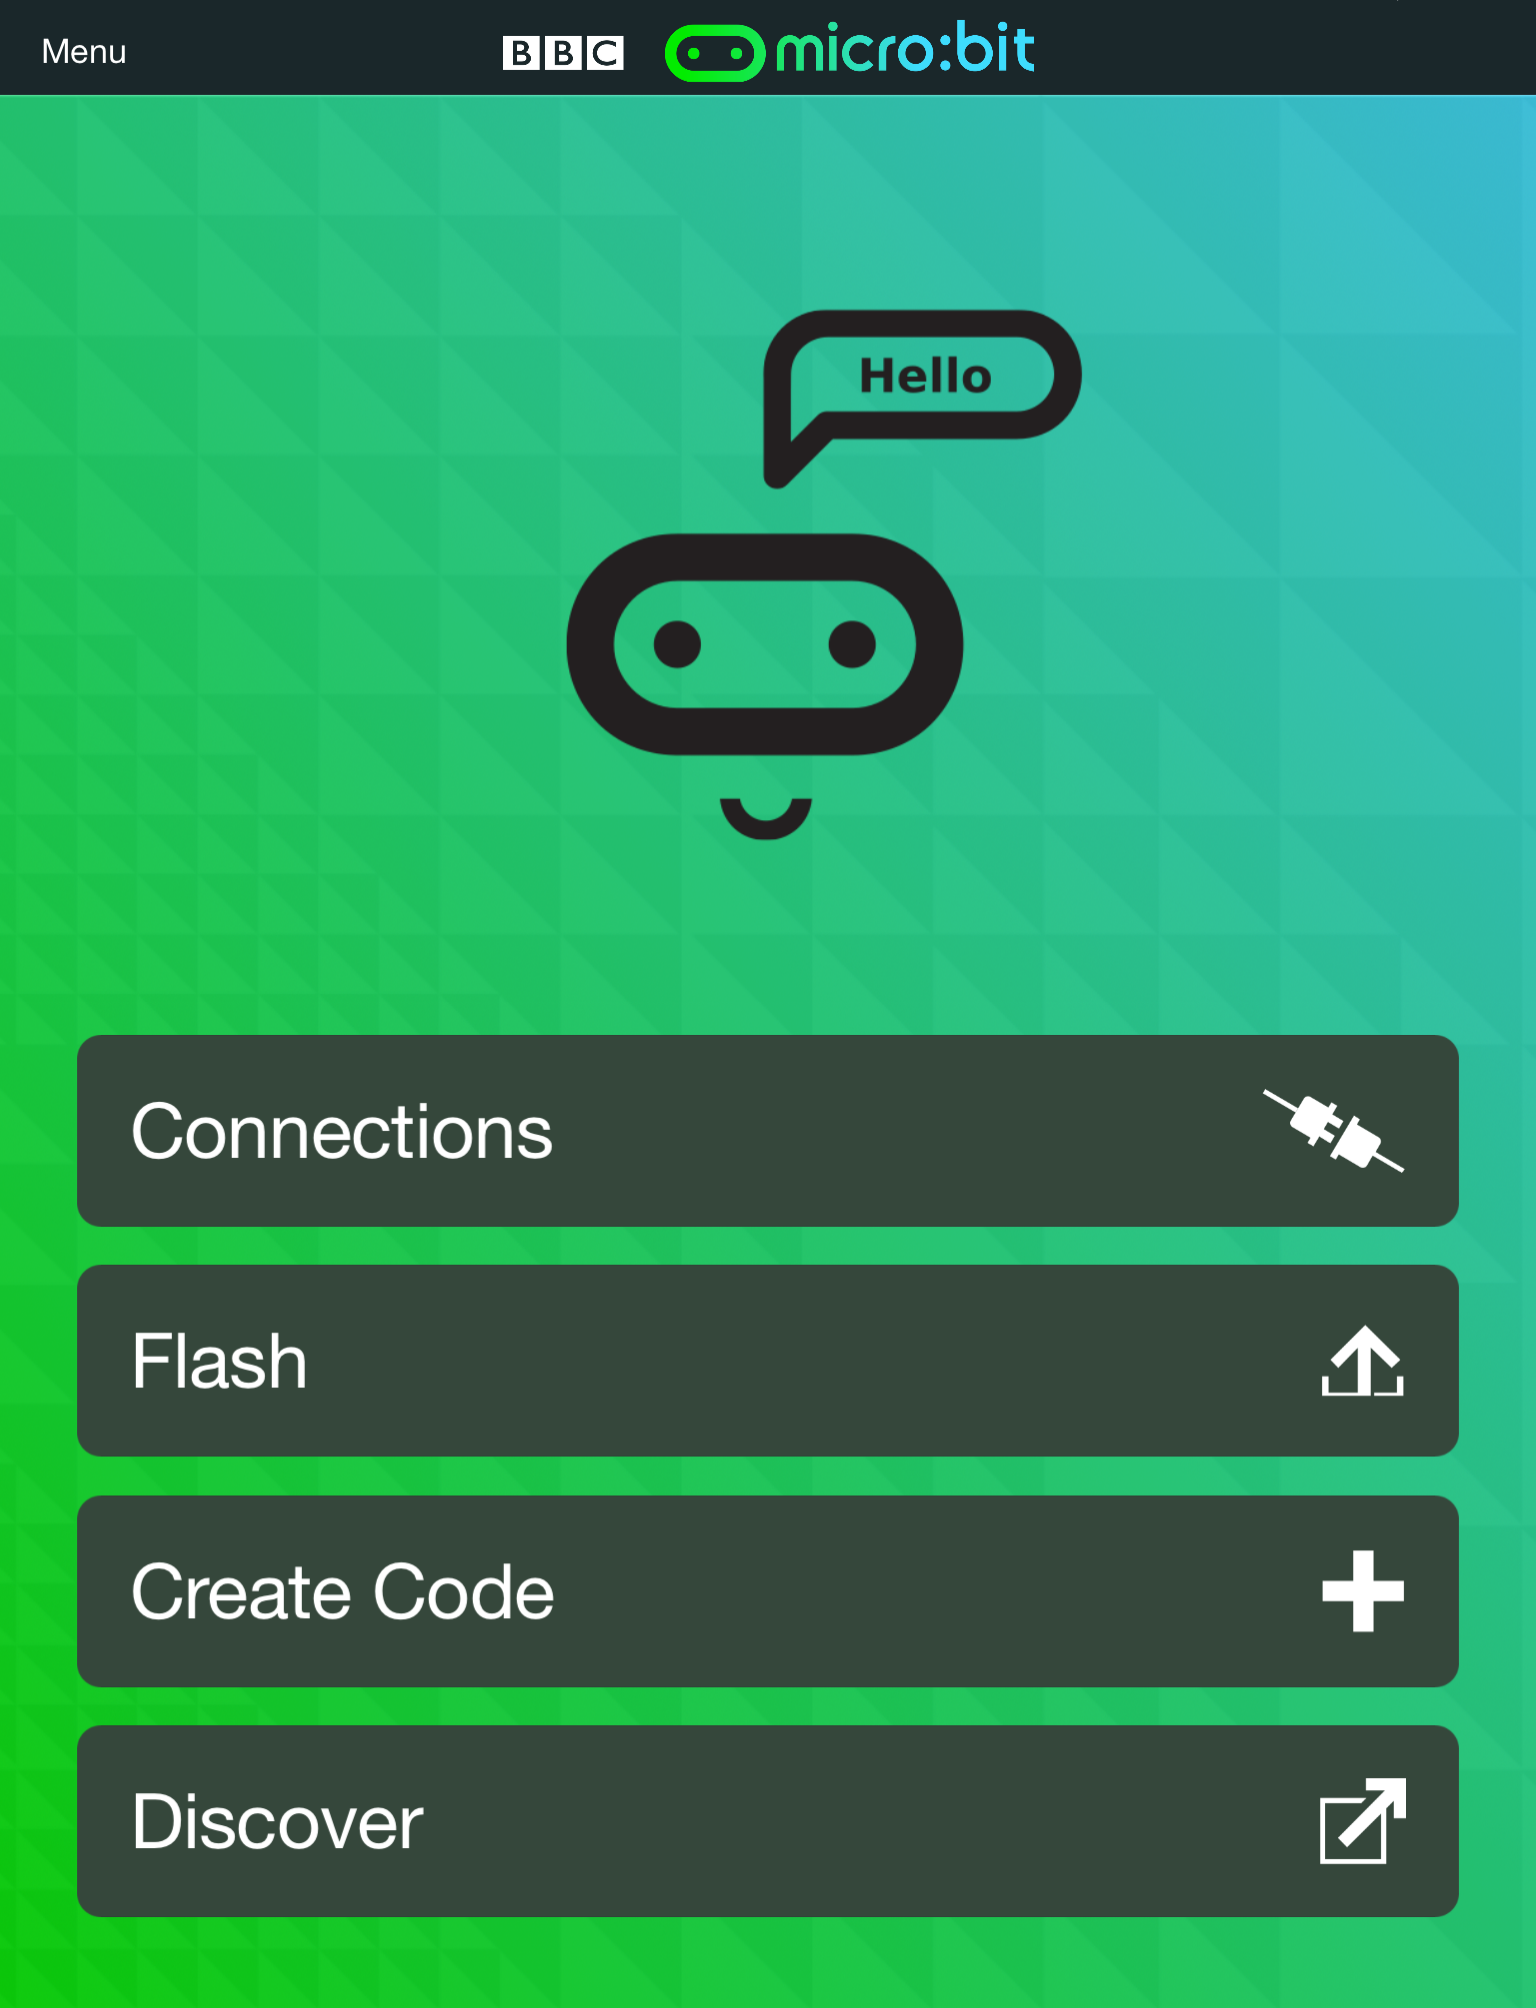 The official BBC micro:bit iOS app is now live